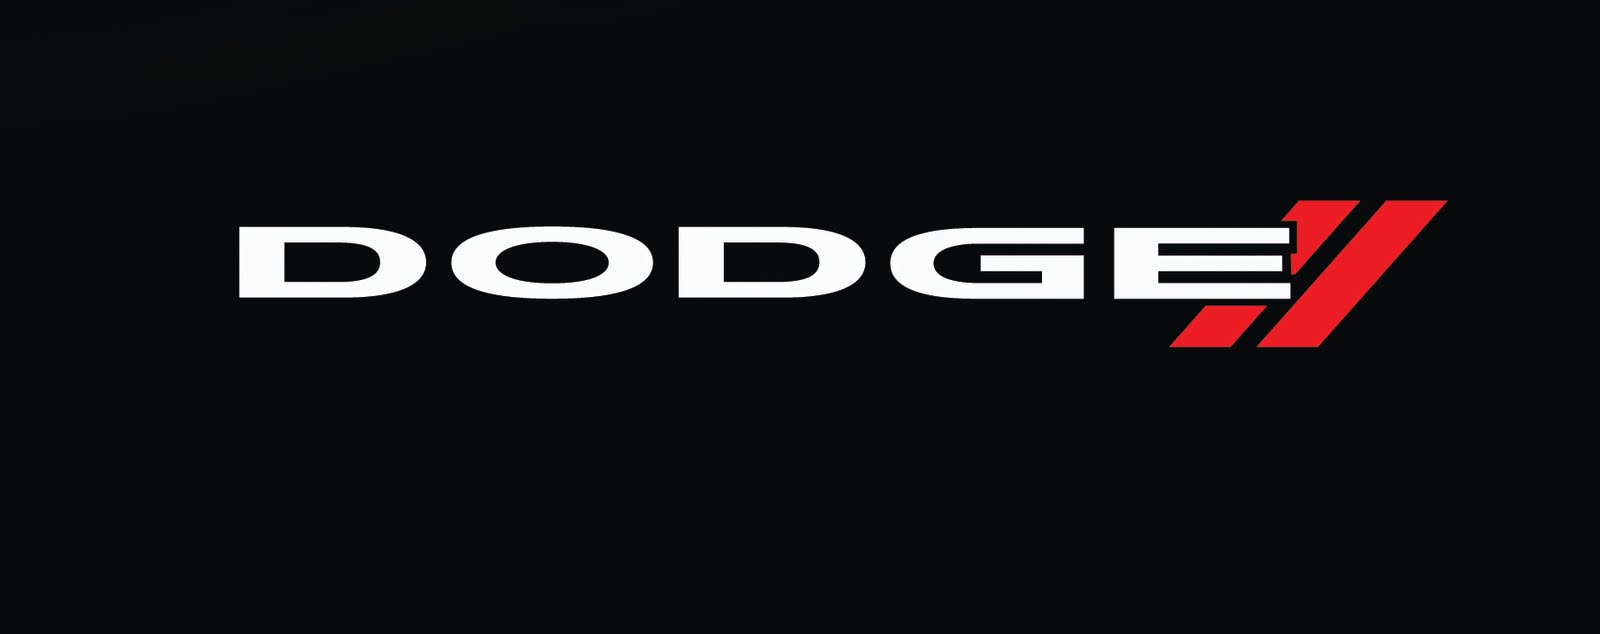 dodge queue meaning Dodge Logo, Dodge Car Symbol Meaning and History  Car